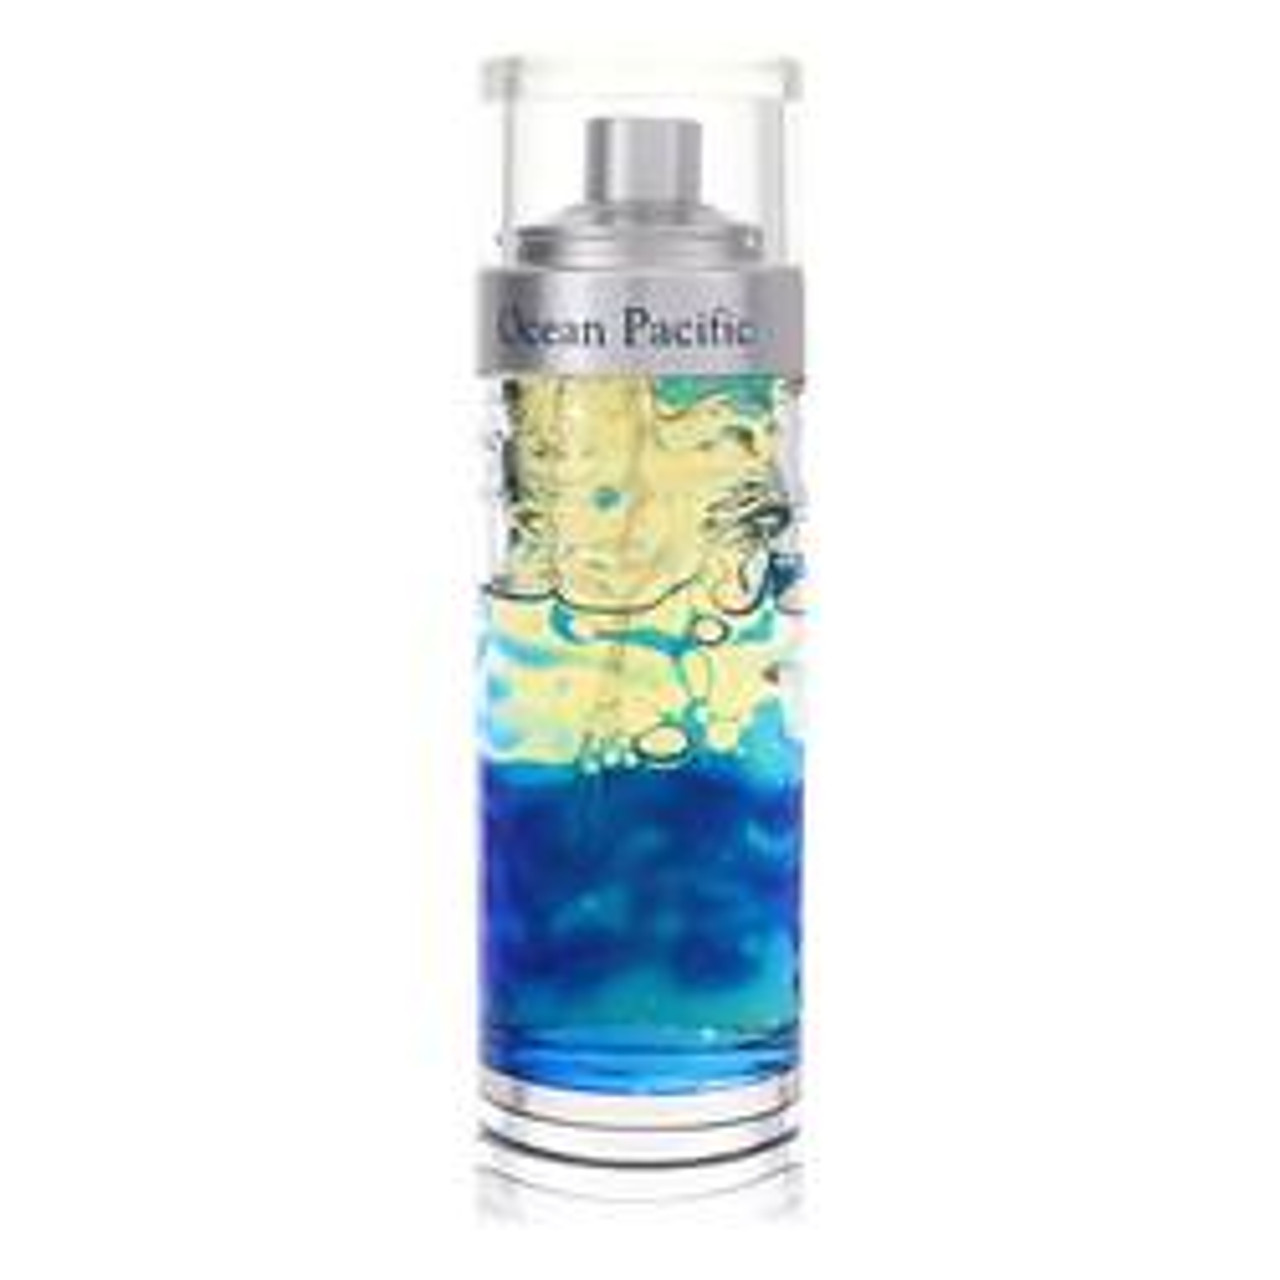 Ocean Pacific Cologne By Ocean Pacific Cologne Spray (unboxed) 1.7 oz for Men - [From 15.00 - Choose pk Qty ] - *Ships from Miami